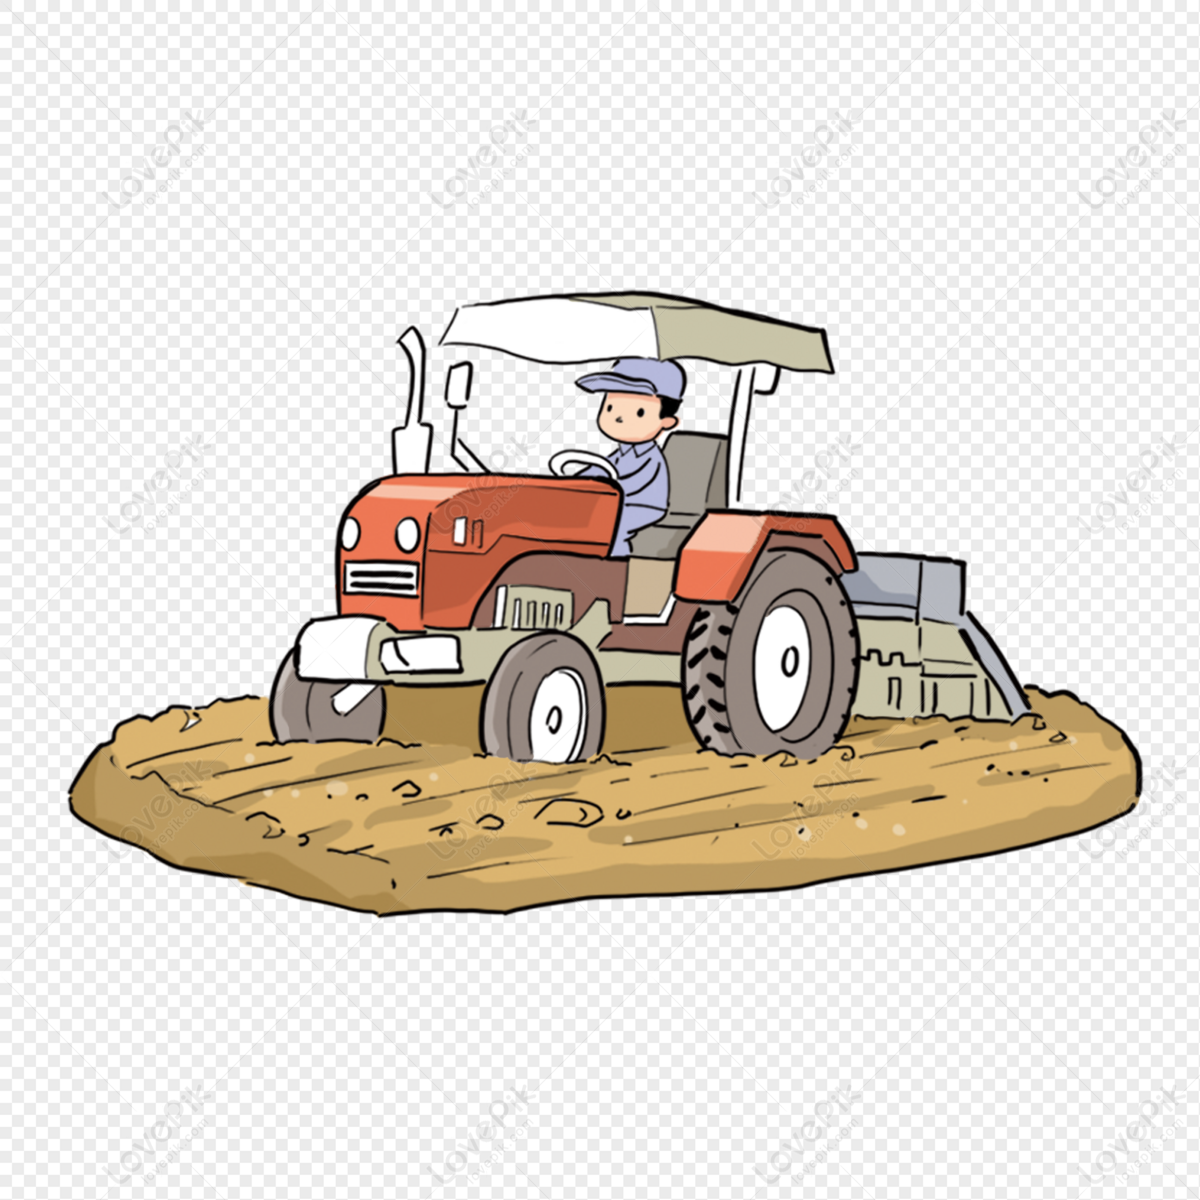 Cartoon Tractor PNG Image And Clipart Image For Free Download - Lovepik |  401565018